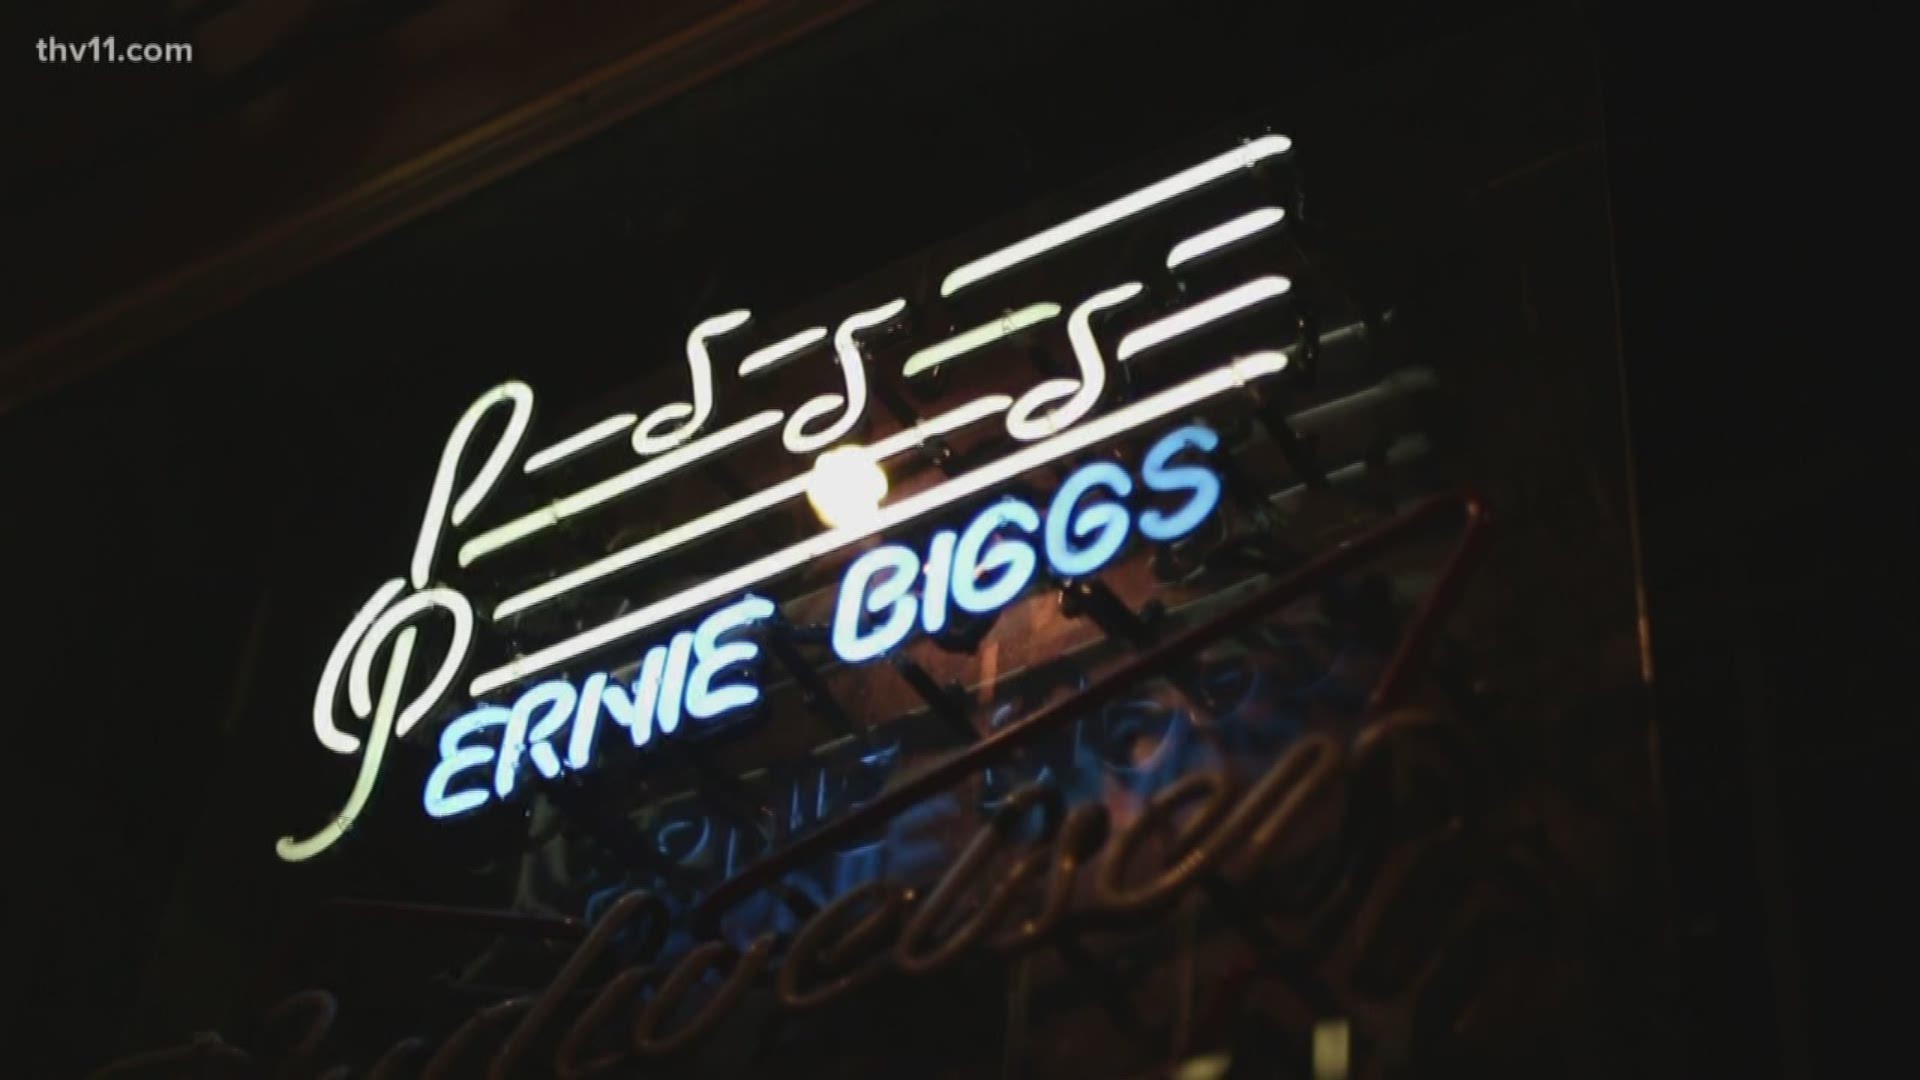 Saturday night was the final night for Ernie Biggs. After nearly two decades, management of the piano bar decided they were shutting their doors for good.